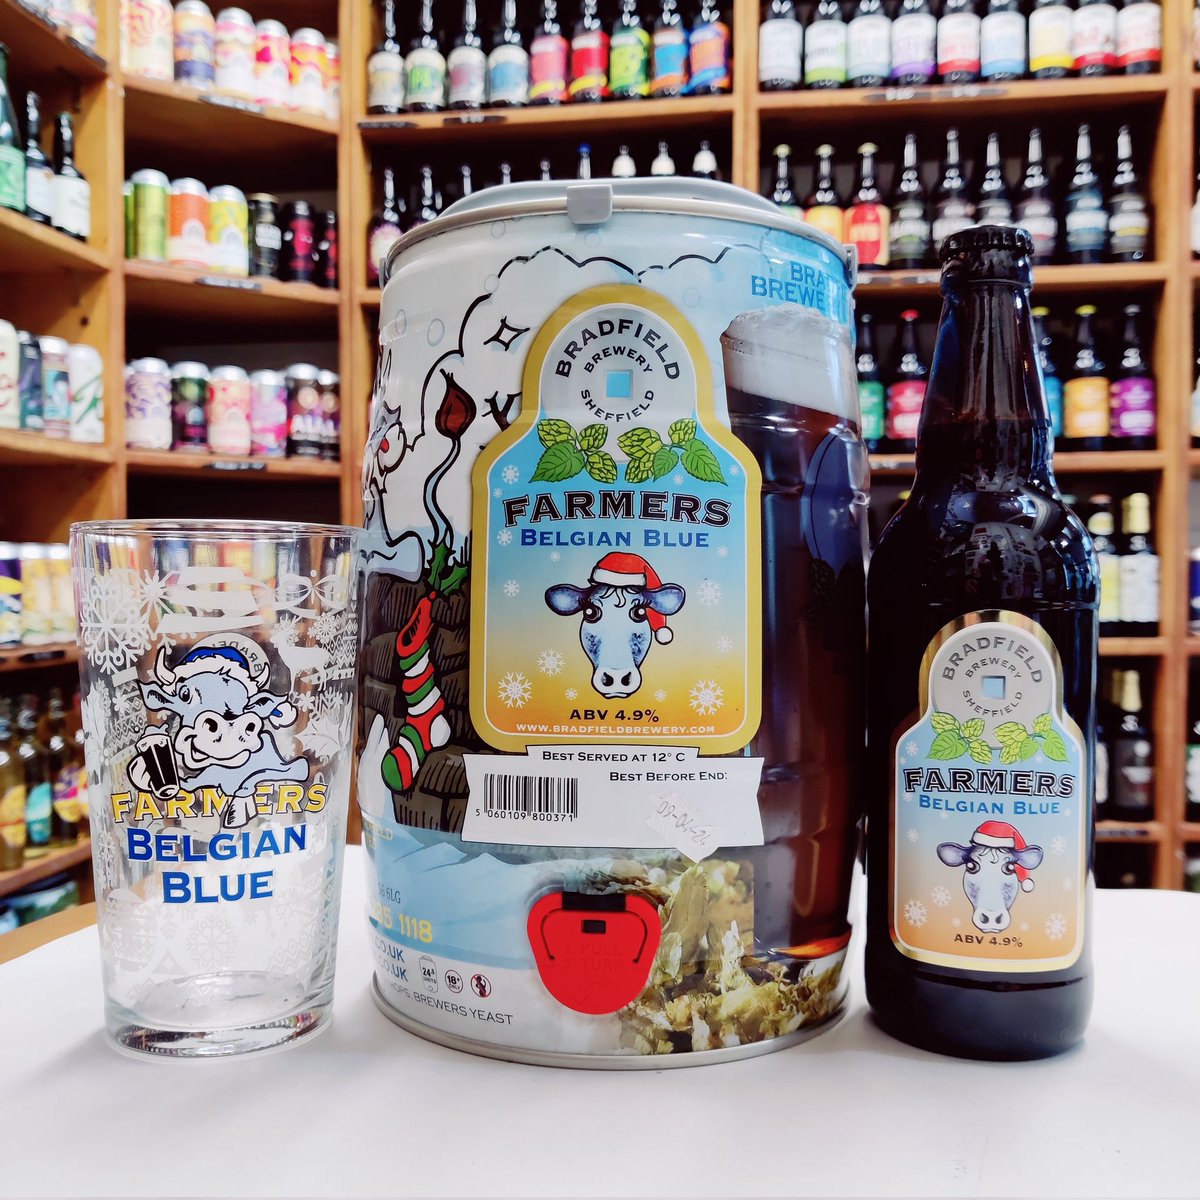 Joanne & Jordan are back from a nice holiday, just opening up, here 'til 5.30pm! Who's drinking what in Sheffield? Our top 3 sellers on Saturday were @BradfieldBrew Belgian Blue @kernelbrewery Hopfenweisse Idaho-7 @AbbeydaleBeers Moonshine Pale Ale #indemand